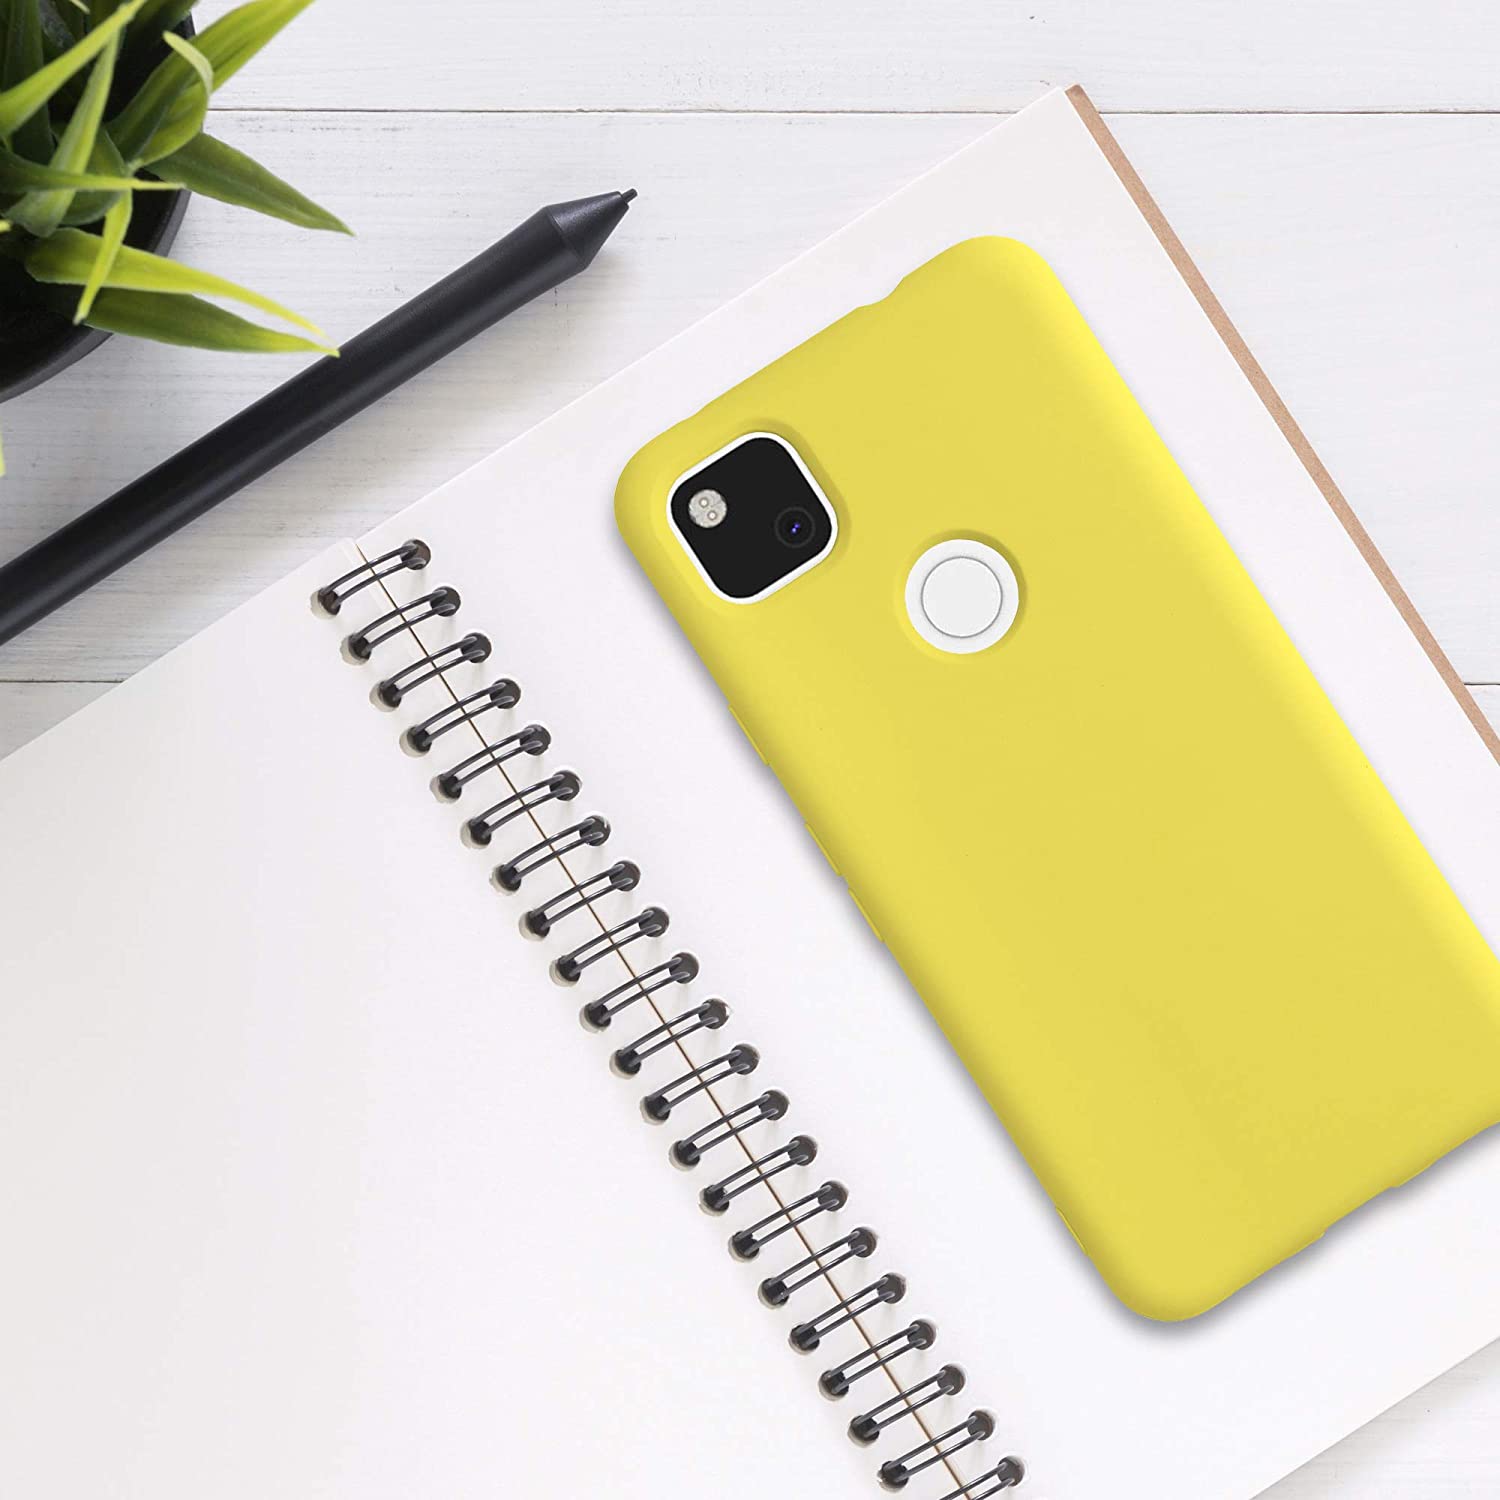 kwmobile Case Compatible with Google Pixel 4a - Case Soft Rubberized TPU - Pastel Yellow Matte - e4cents